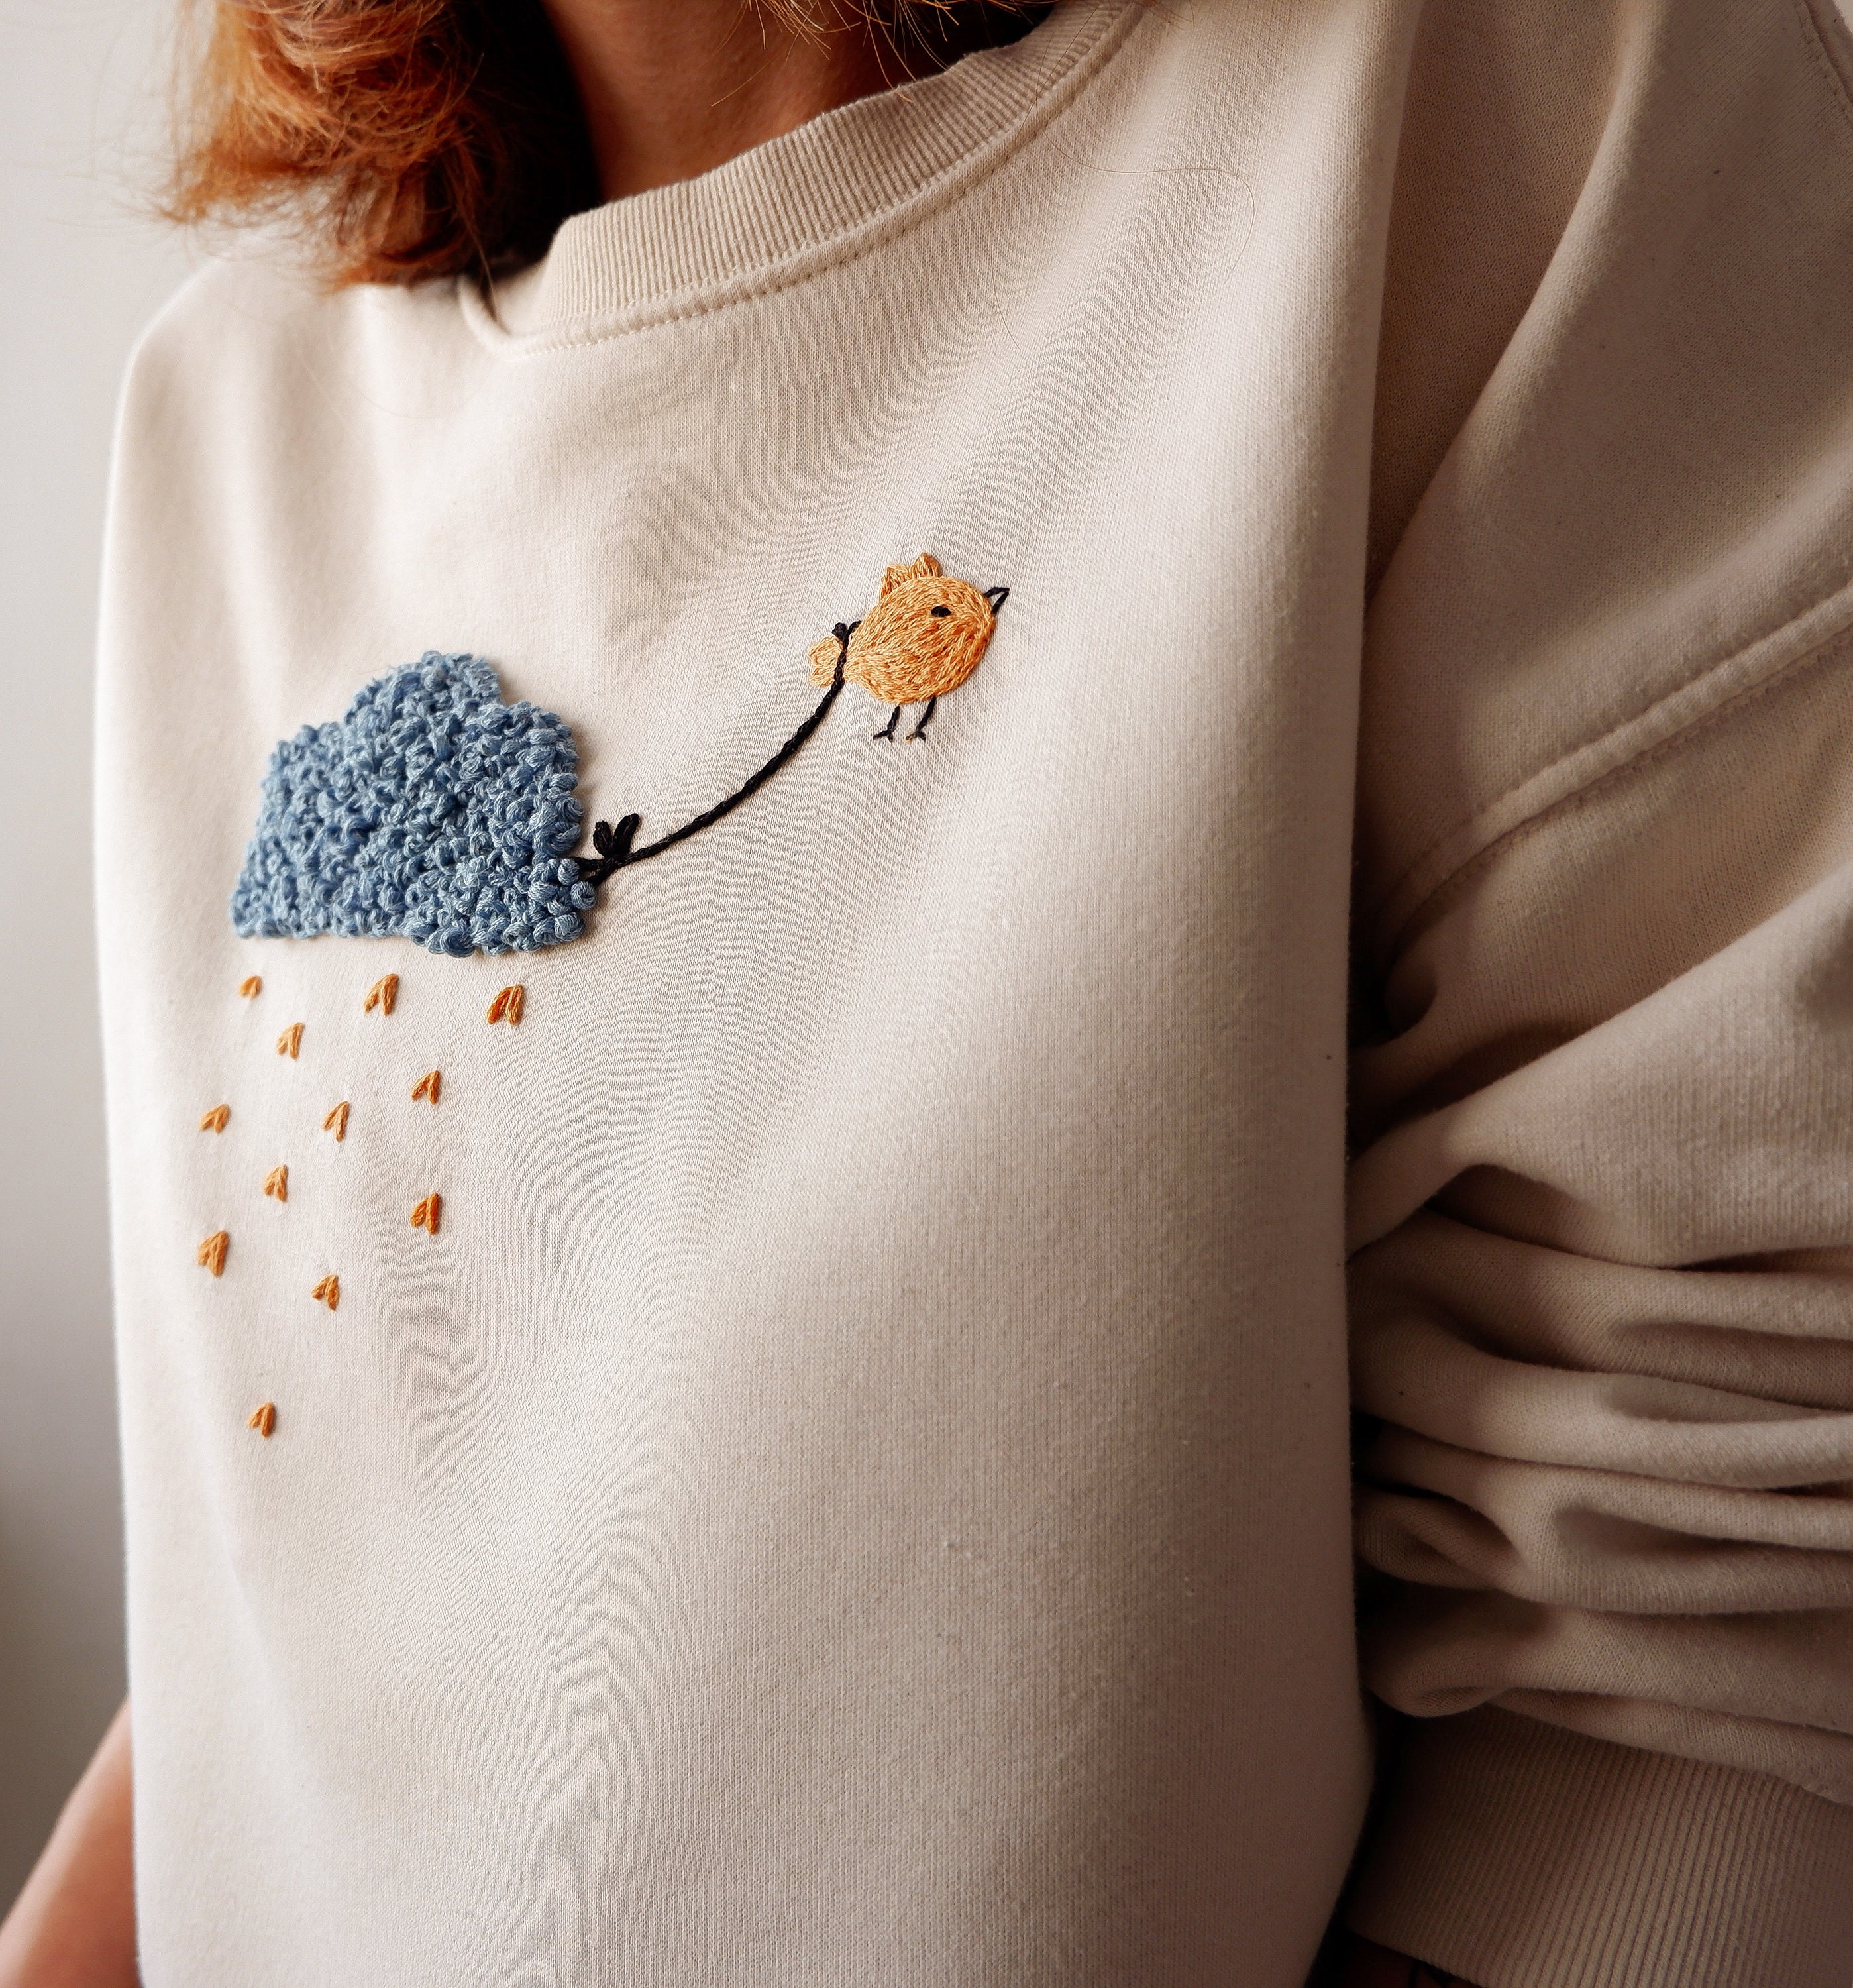 How I backed this sweatshirt! 🎅 #embroidery#fiberartist#handembroider